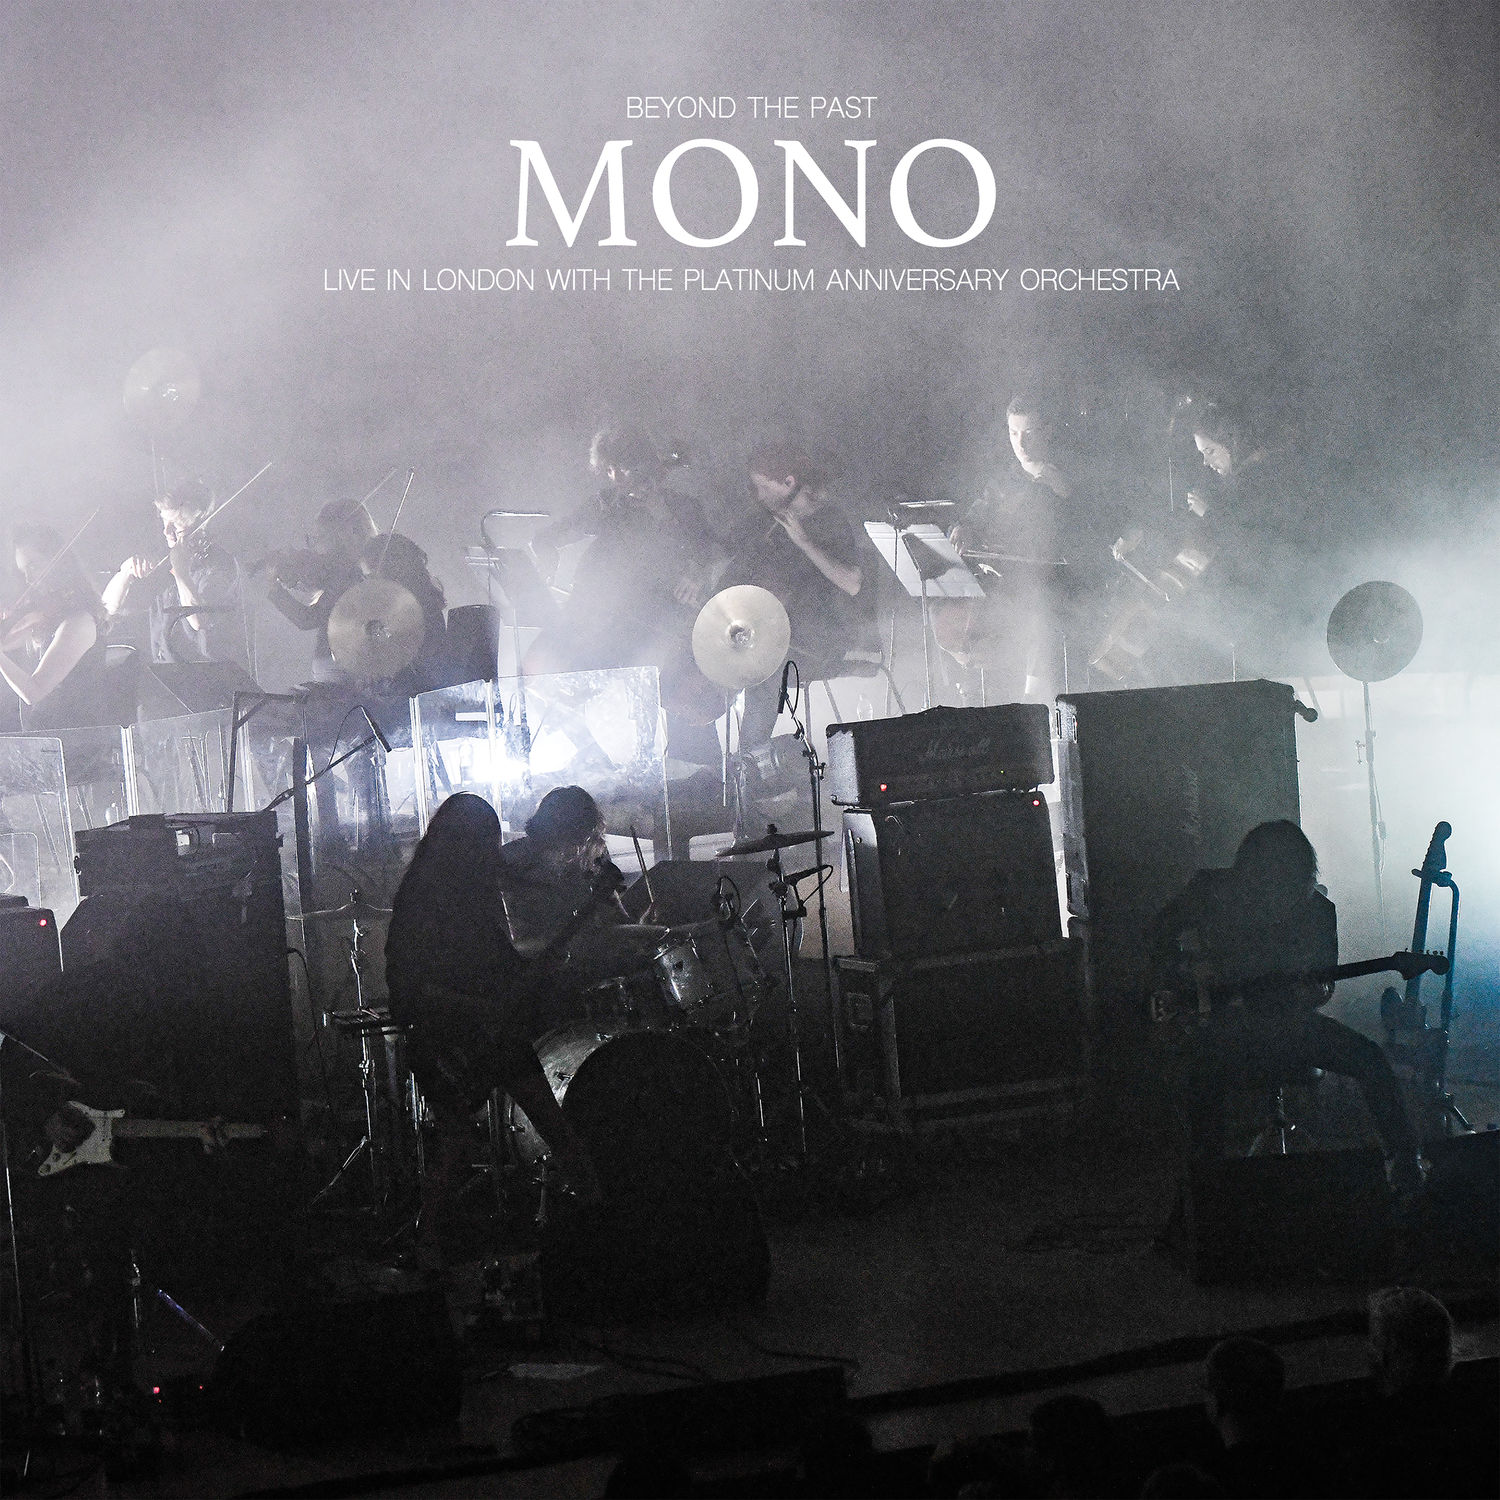 Mono – Beyond the Past – Live in London with the Platinum Anniversary Orchestra (2021) [FLAC 24bit/96kHz]